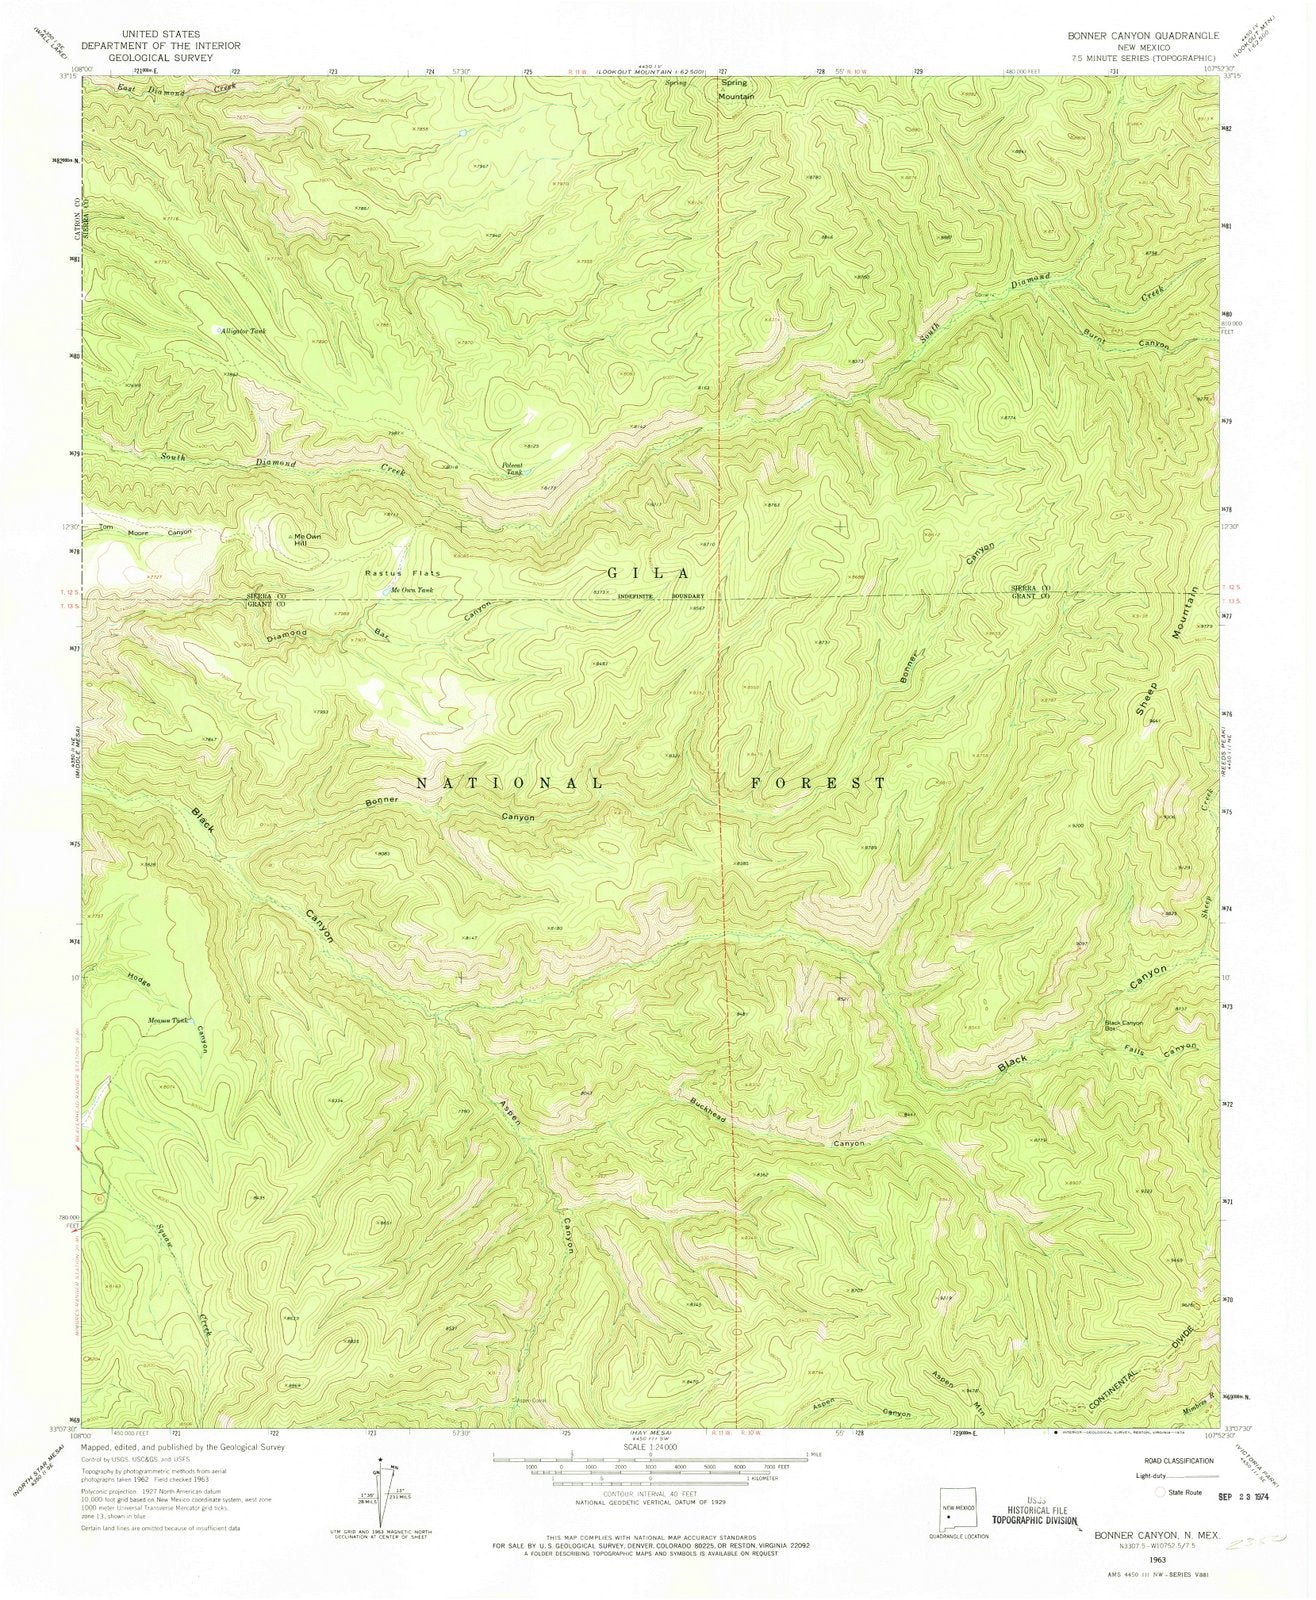 1963 Bonner Canyon, NM - New Mexico - USGS Topographic Map